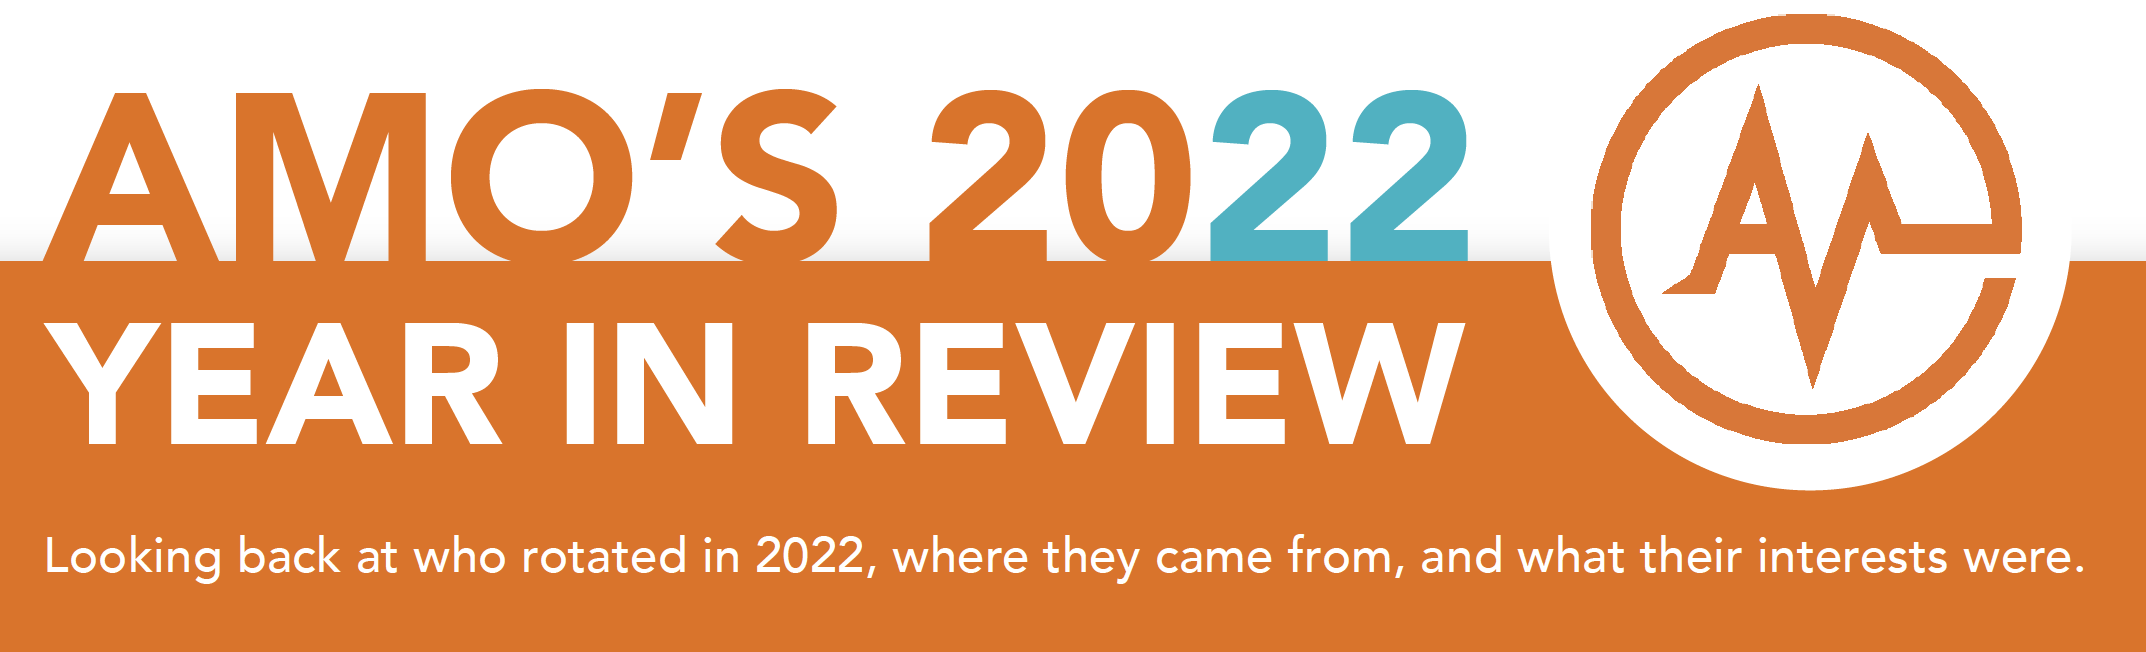 AMO's 2022 Year-in-Review is here. Look back on most popular specialties, programs, and more!